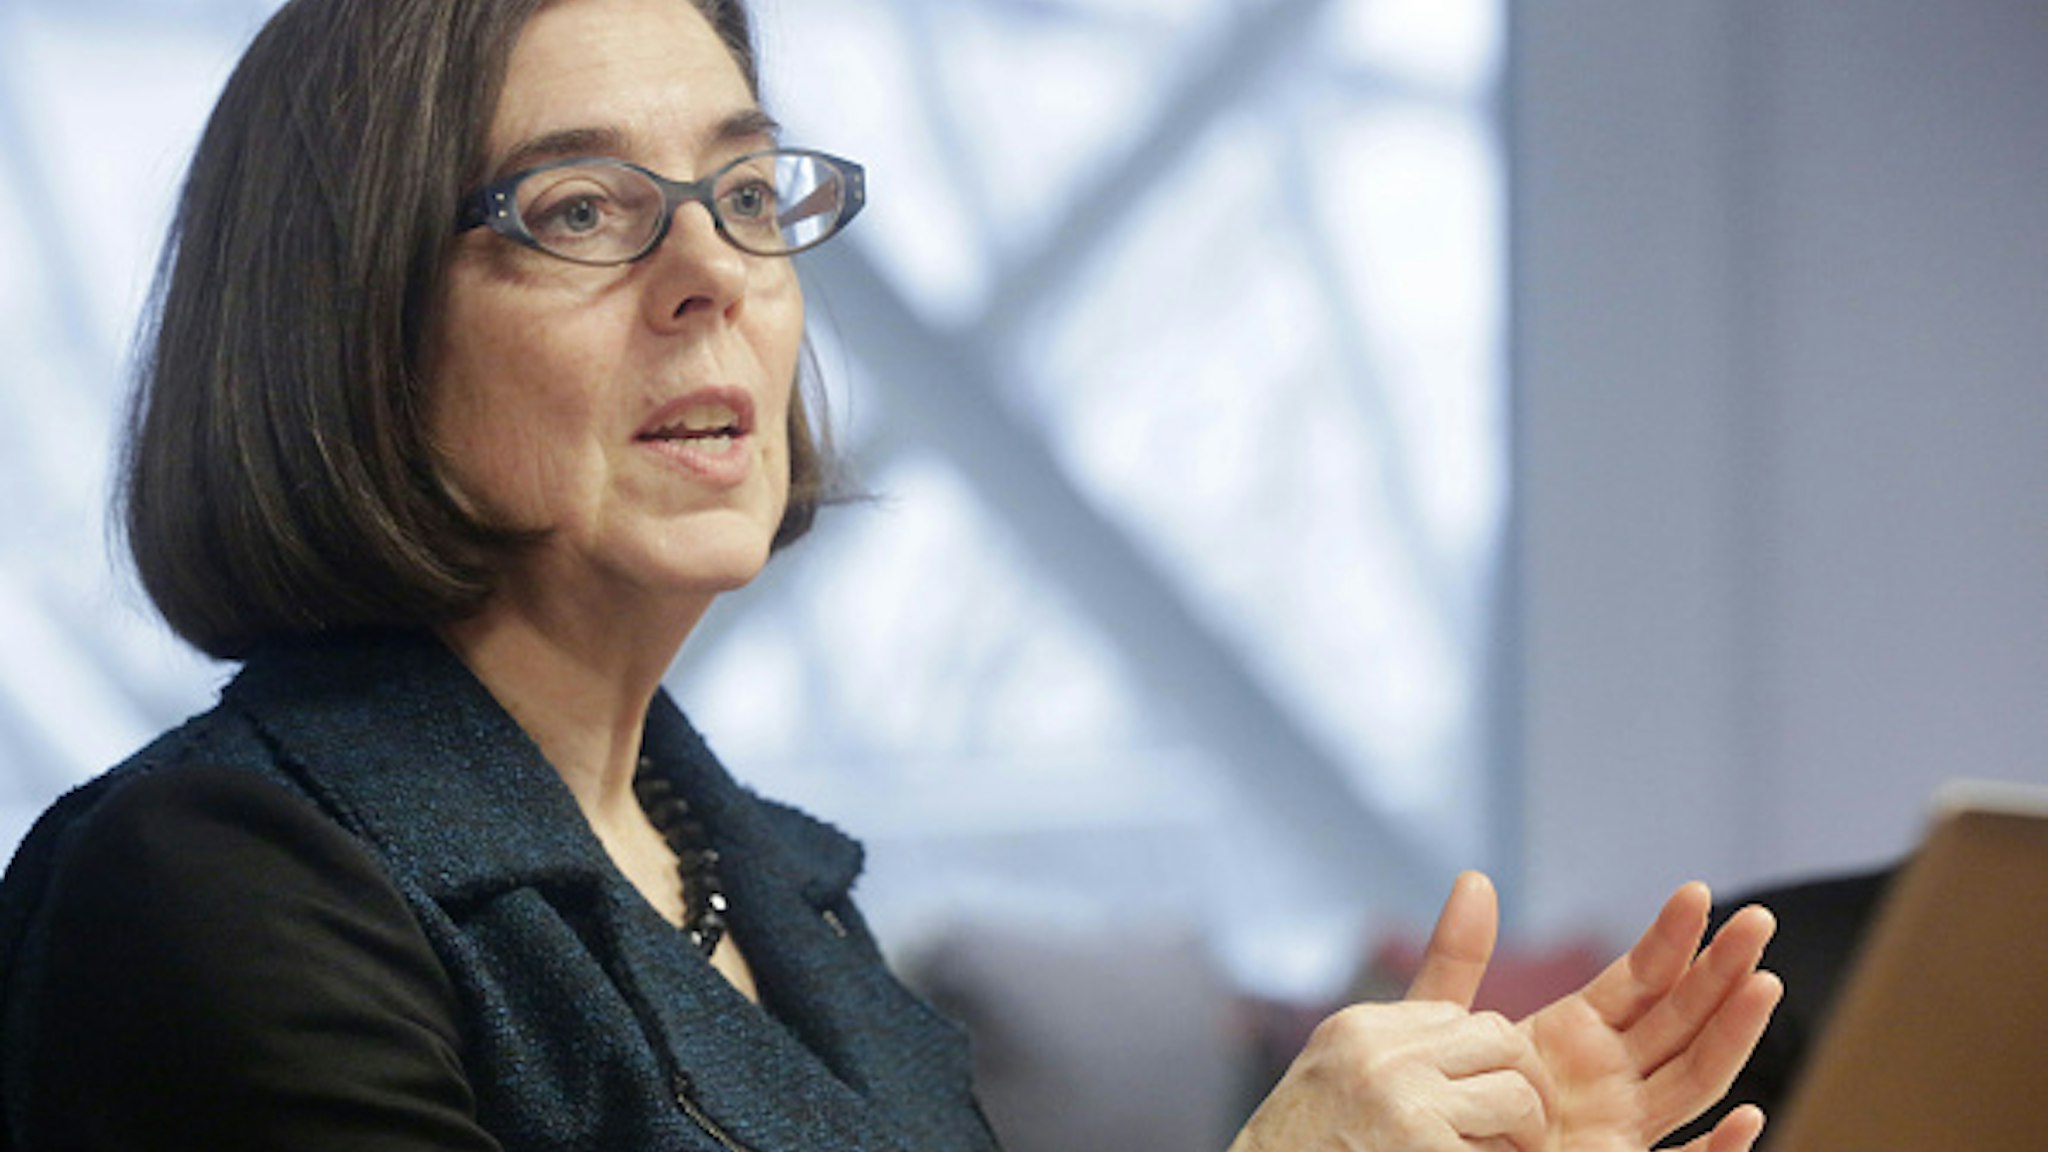 Kate Brown, governor of Oregon, speaks during an interview in Portland, Oregon, U.S. on Wednesday, Jan. 20, 2016. Brown, a Democrat, joined the state House of Representatives in 1991, was later elected to the Senate and served as secretary of state since 2009, before taking over as governor in February.